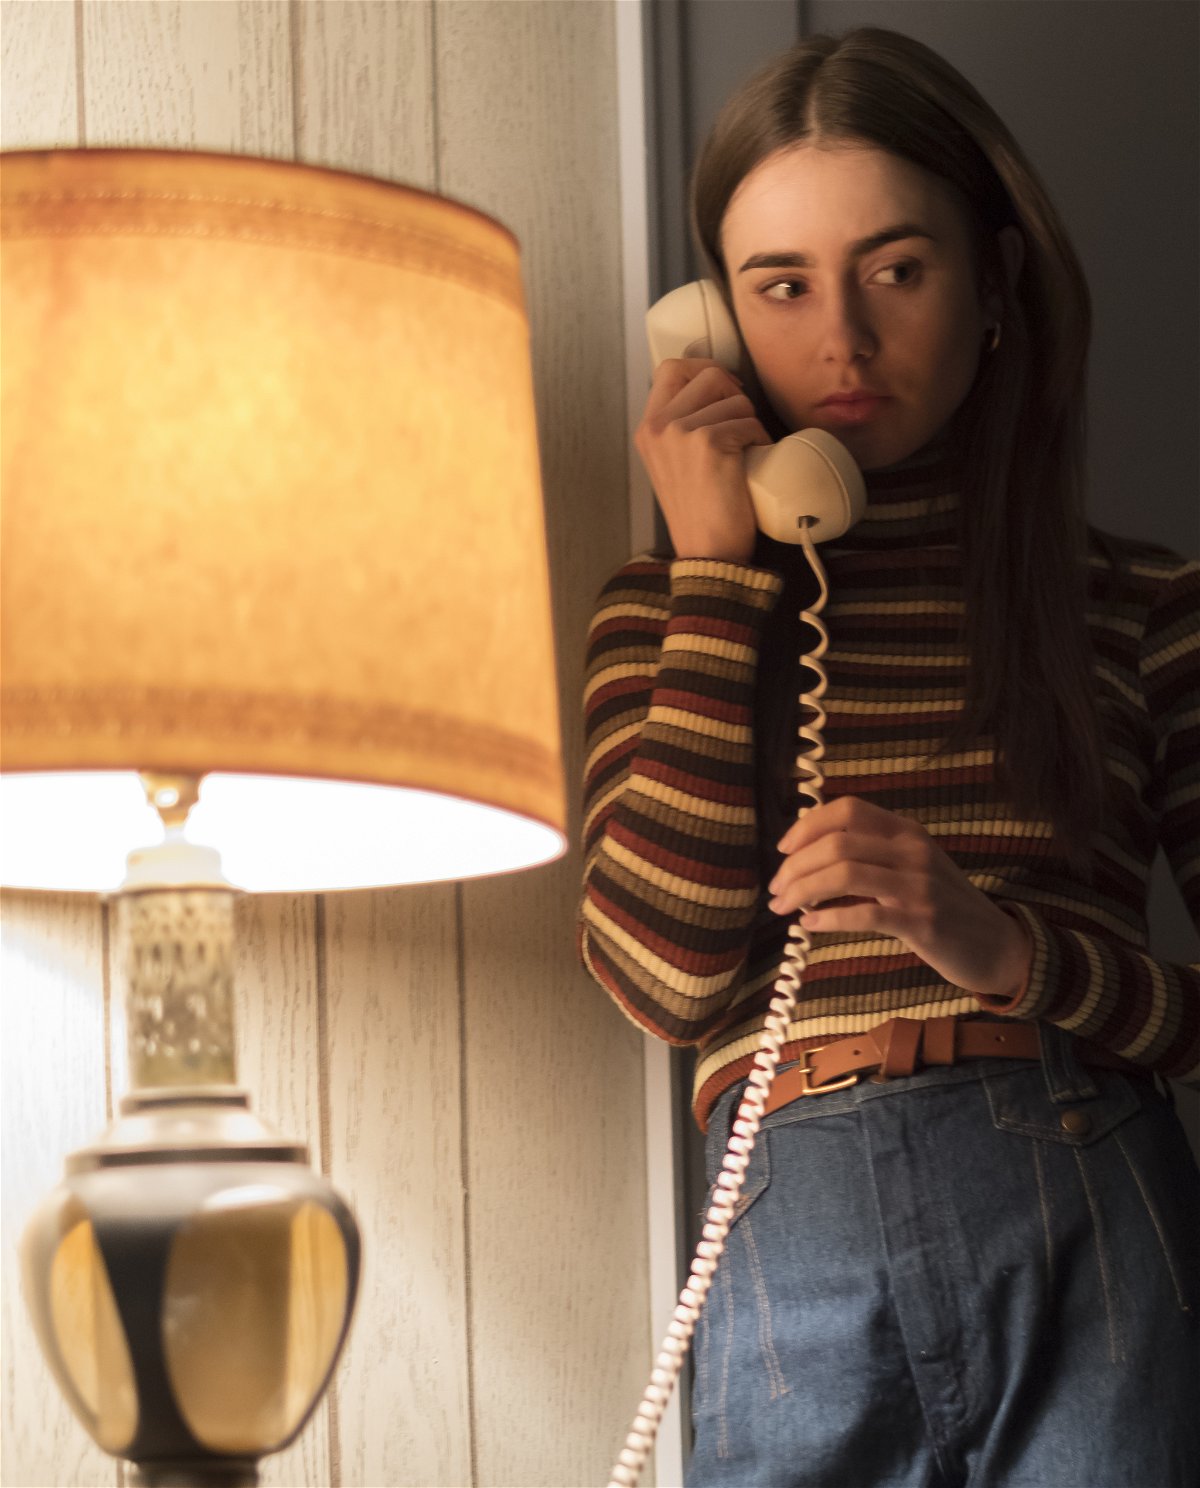 Lily Collins in Ted Bundy - Fascino criminale